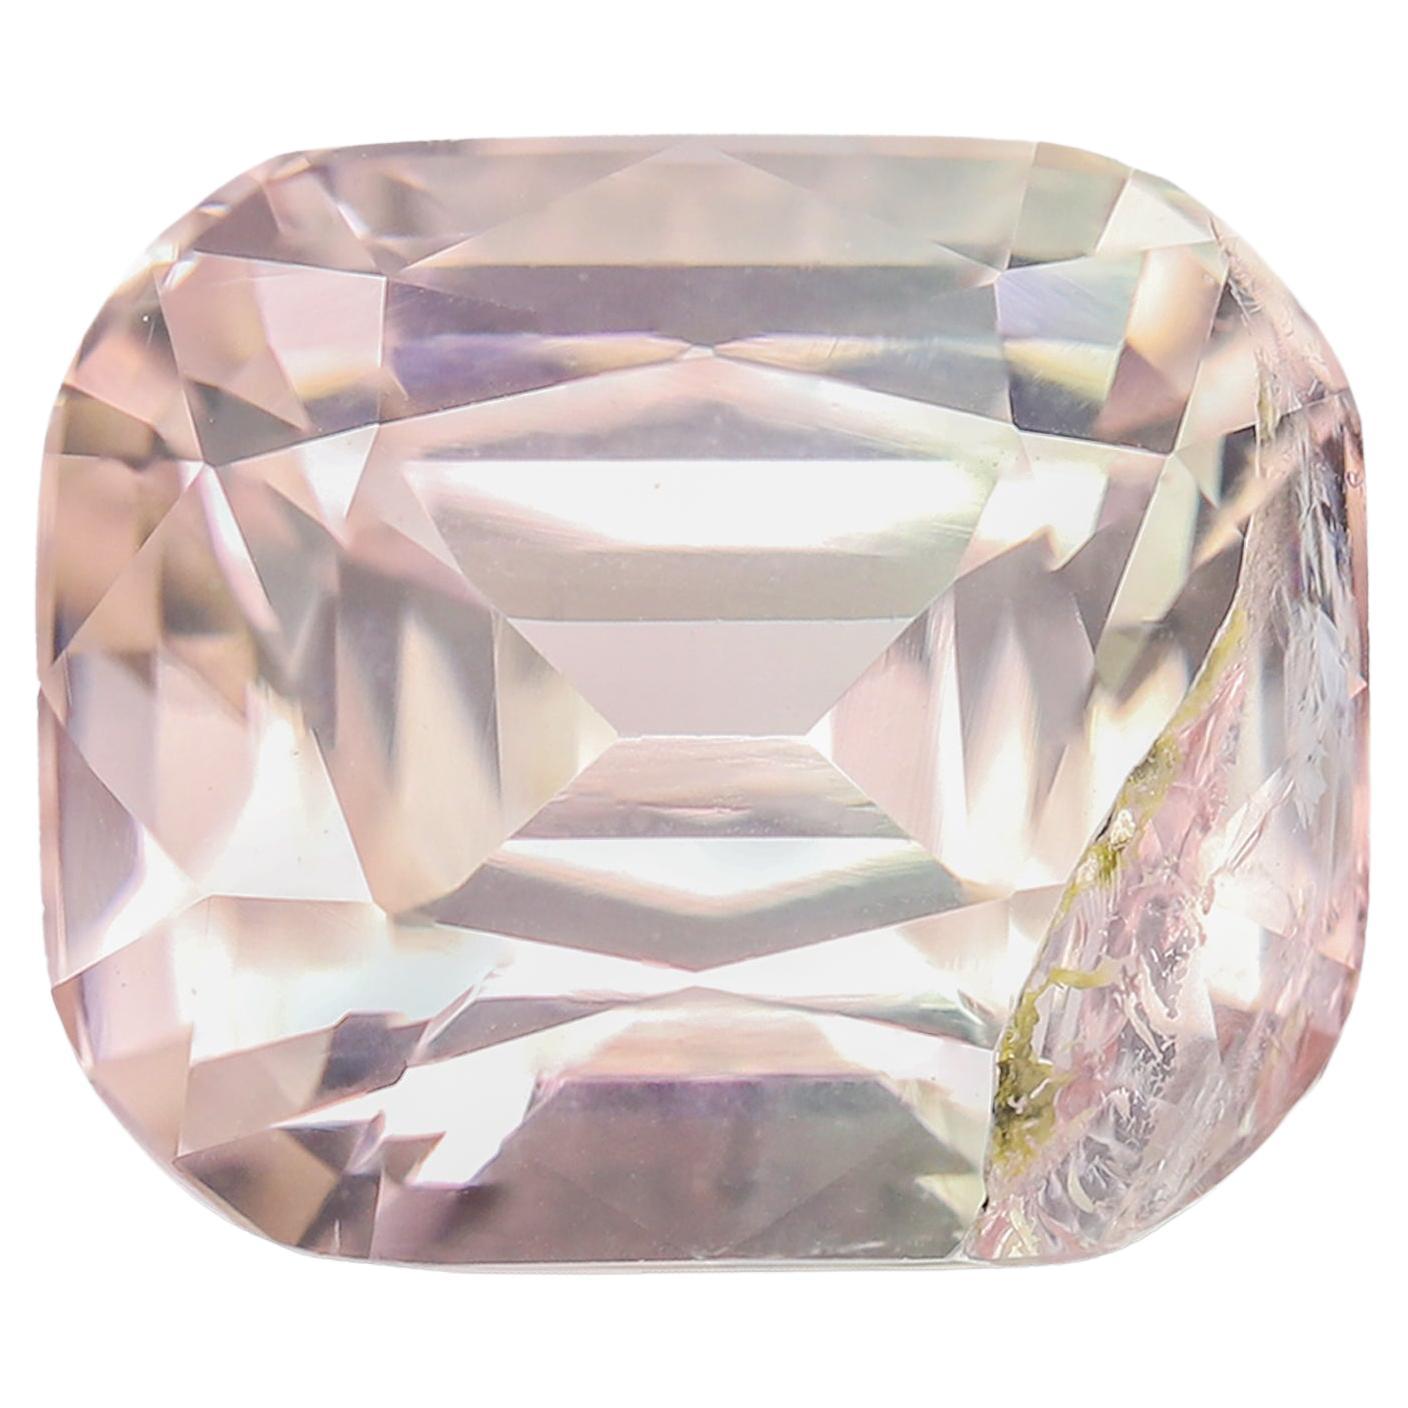 Gorgeous Light Pink Tourmaline Stone 2.90 Carats Tourmaline Gemstone for Ring For Sale